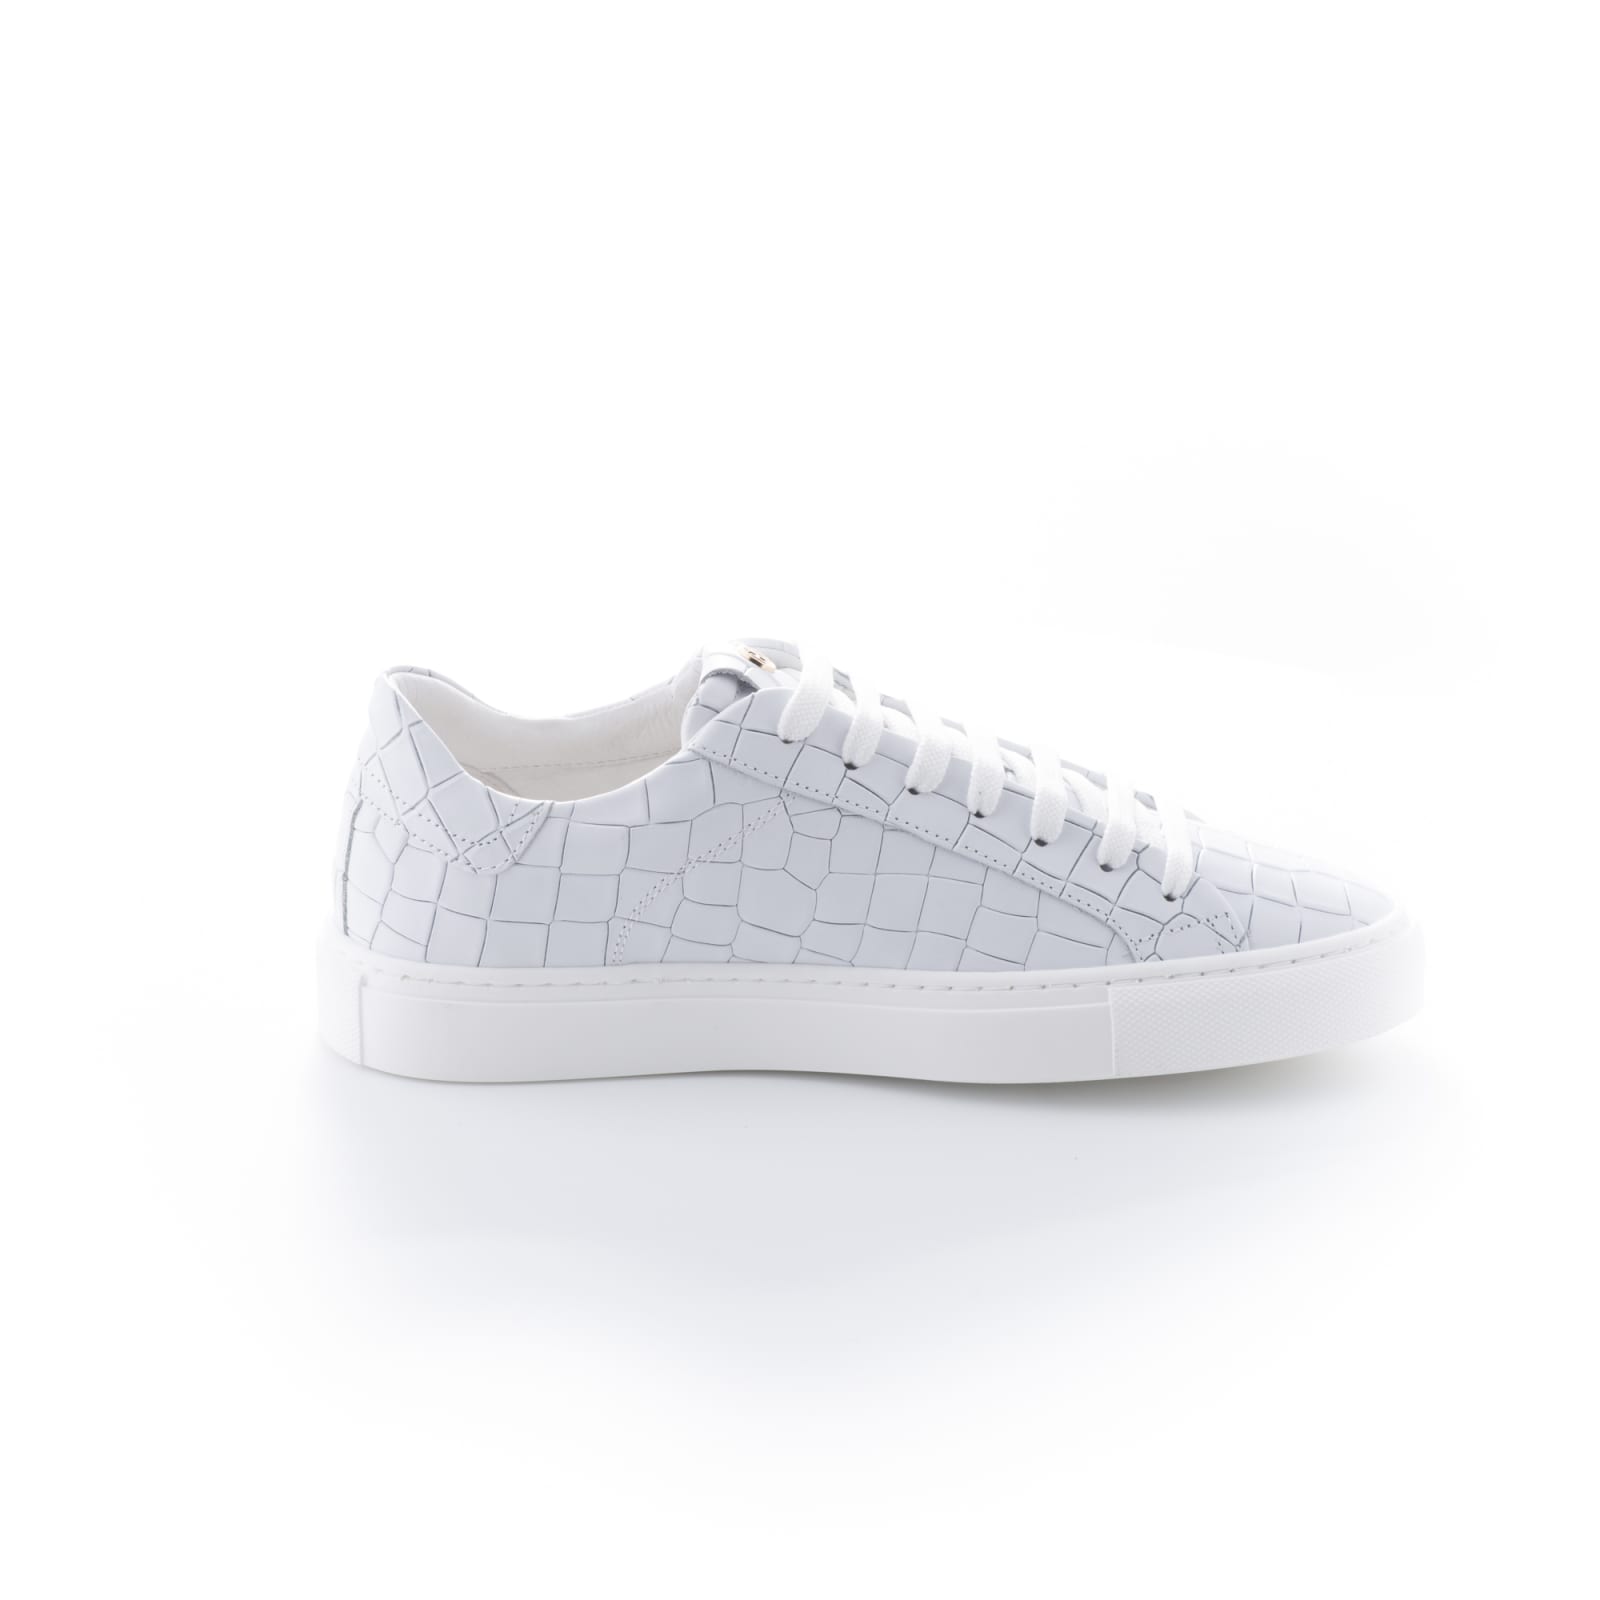 Hide & Jack Essence Tuscany White Sneakers